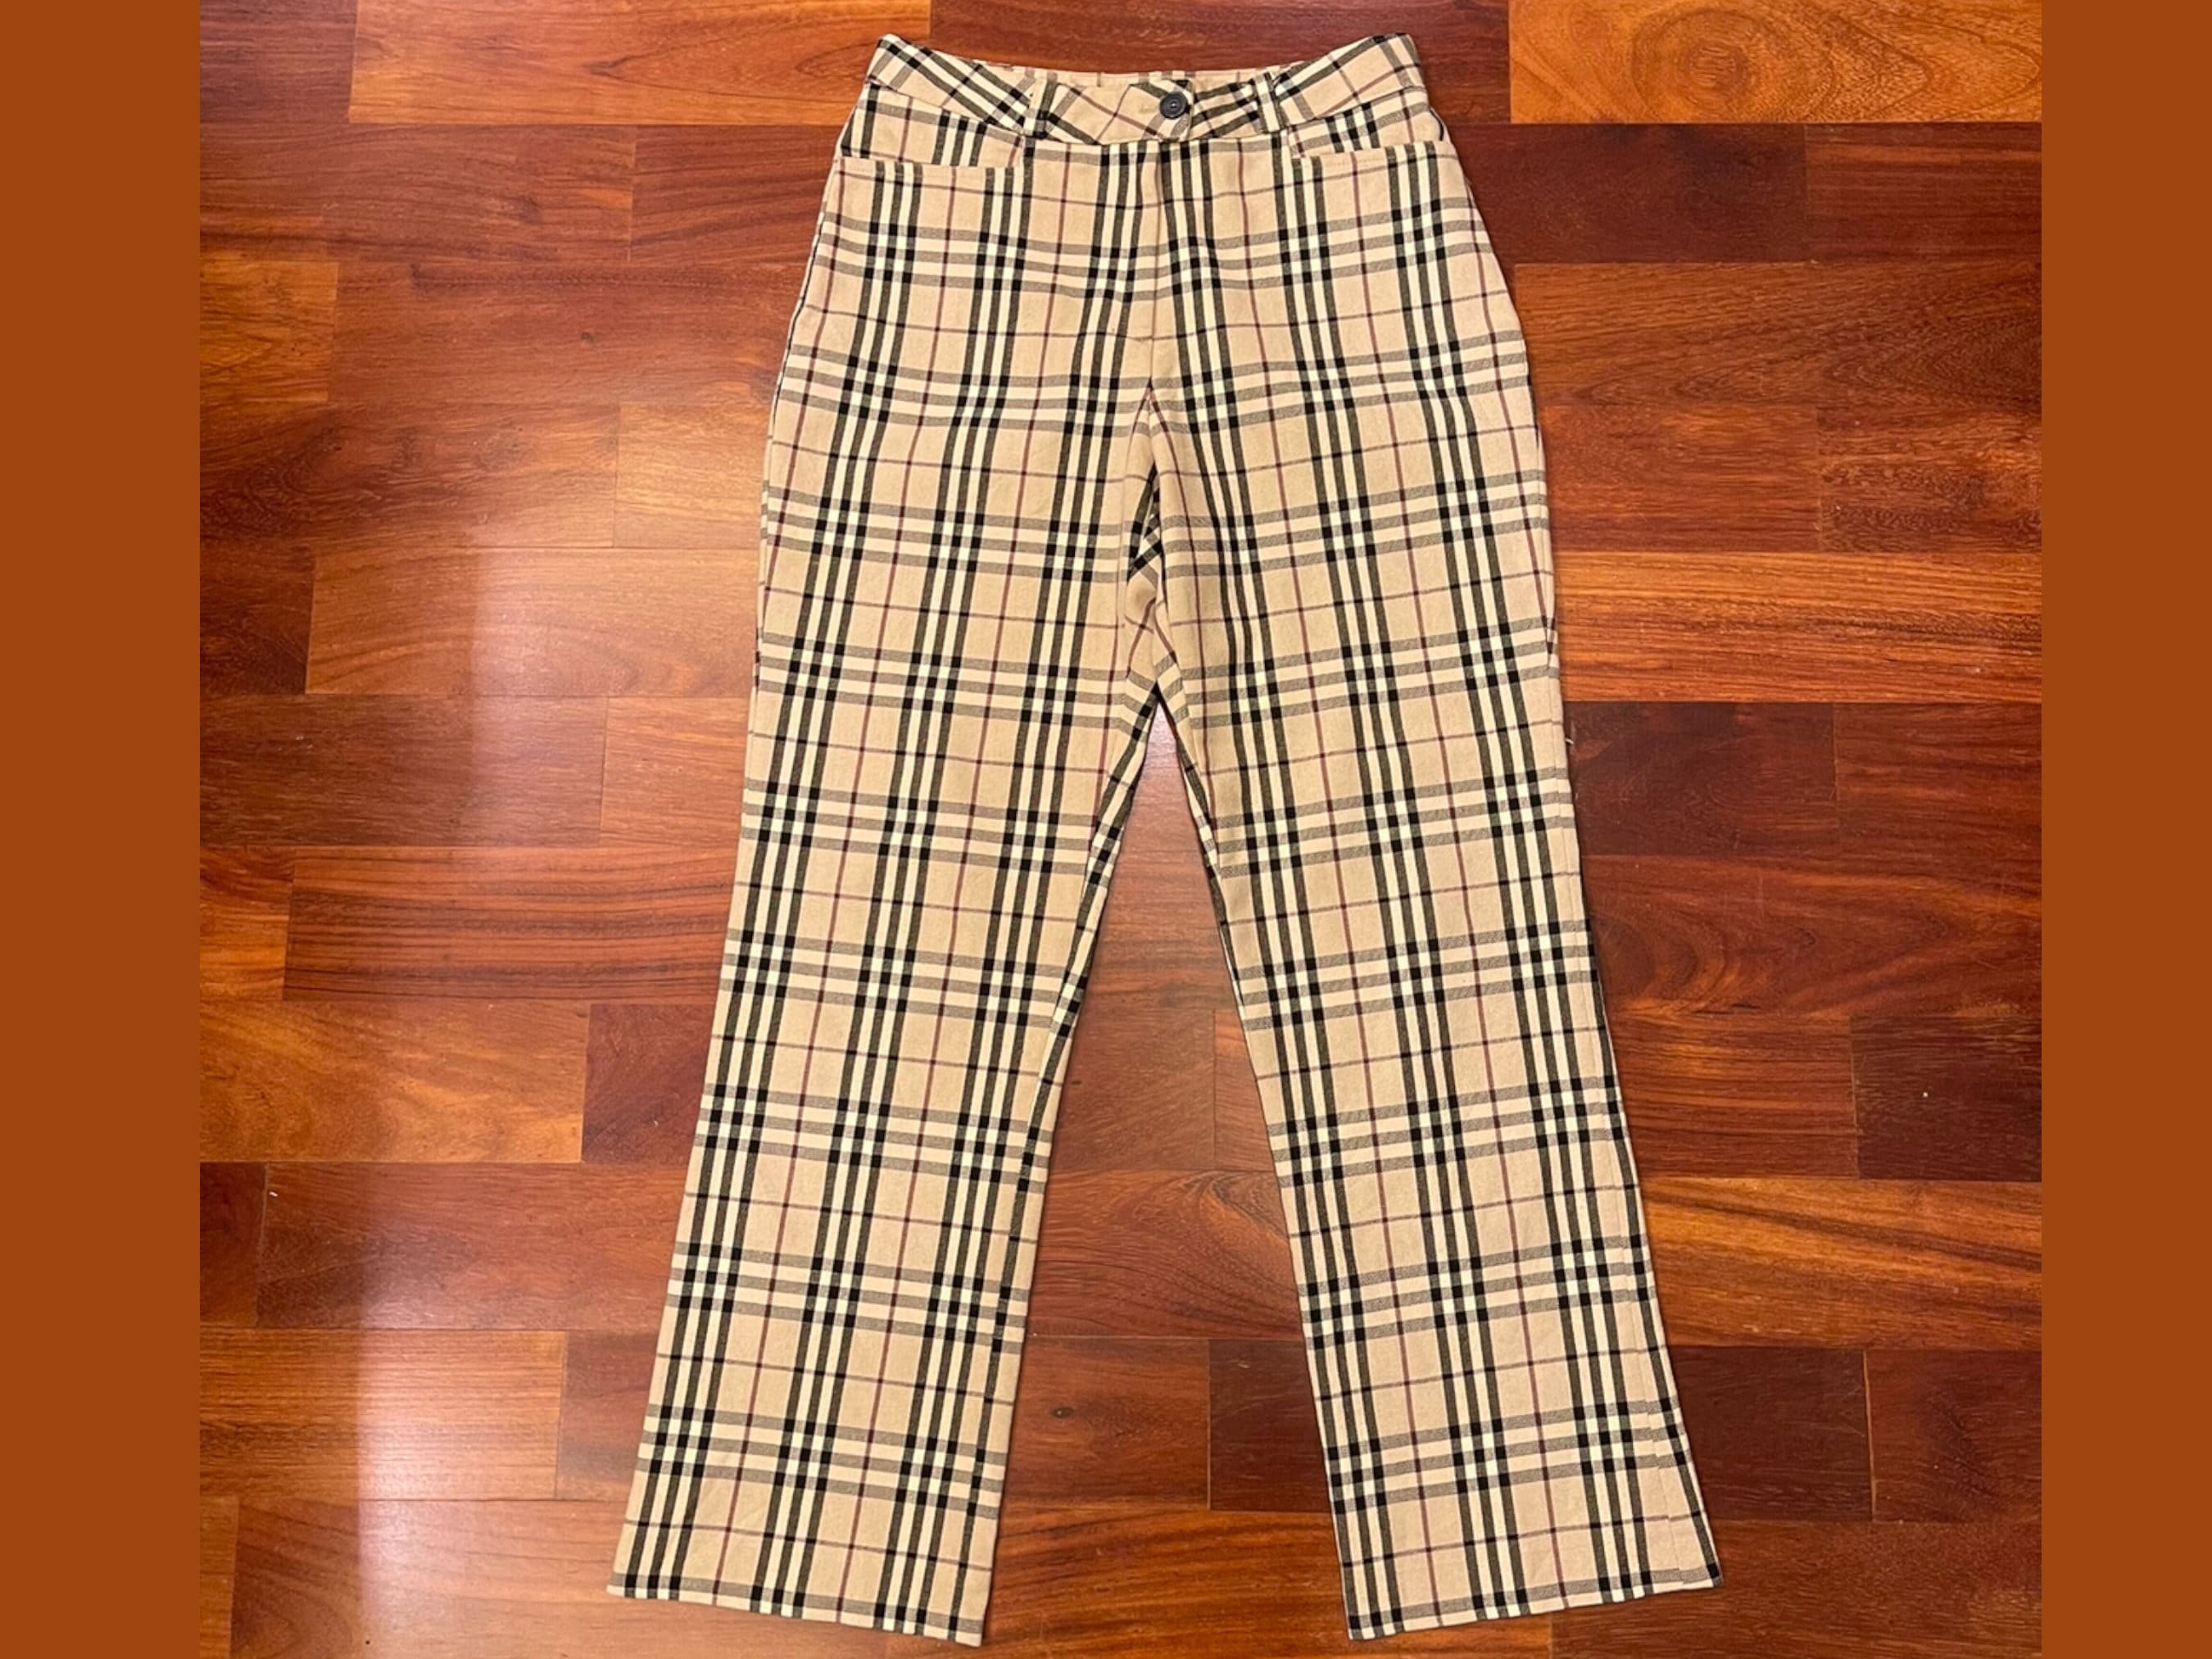 Burberry plaid check trousers with black side trim Womens Fashion  Bottoms Other Bottoms on Carousell